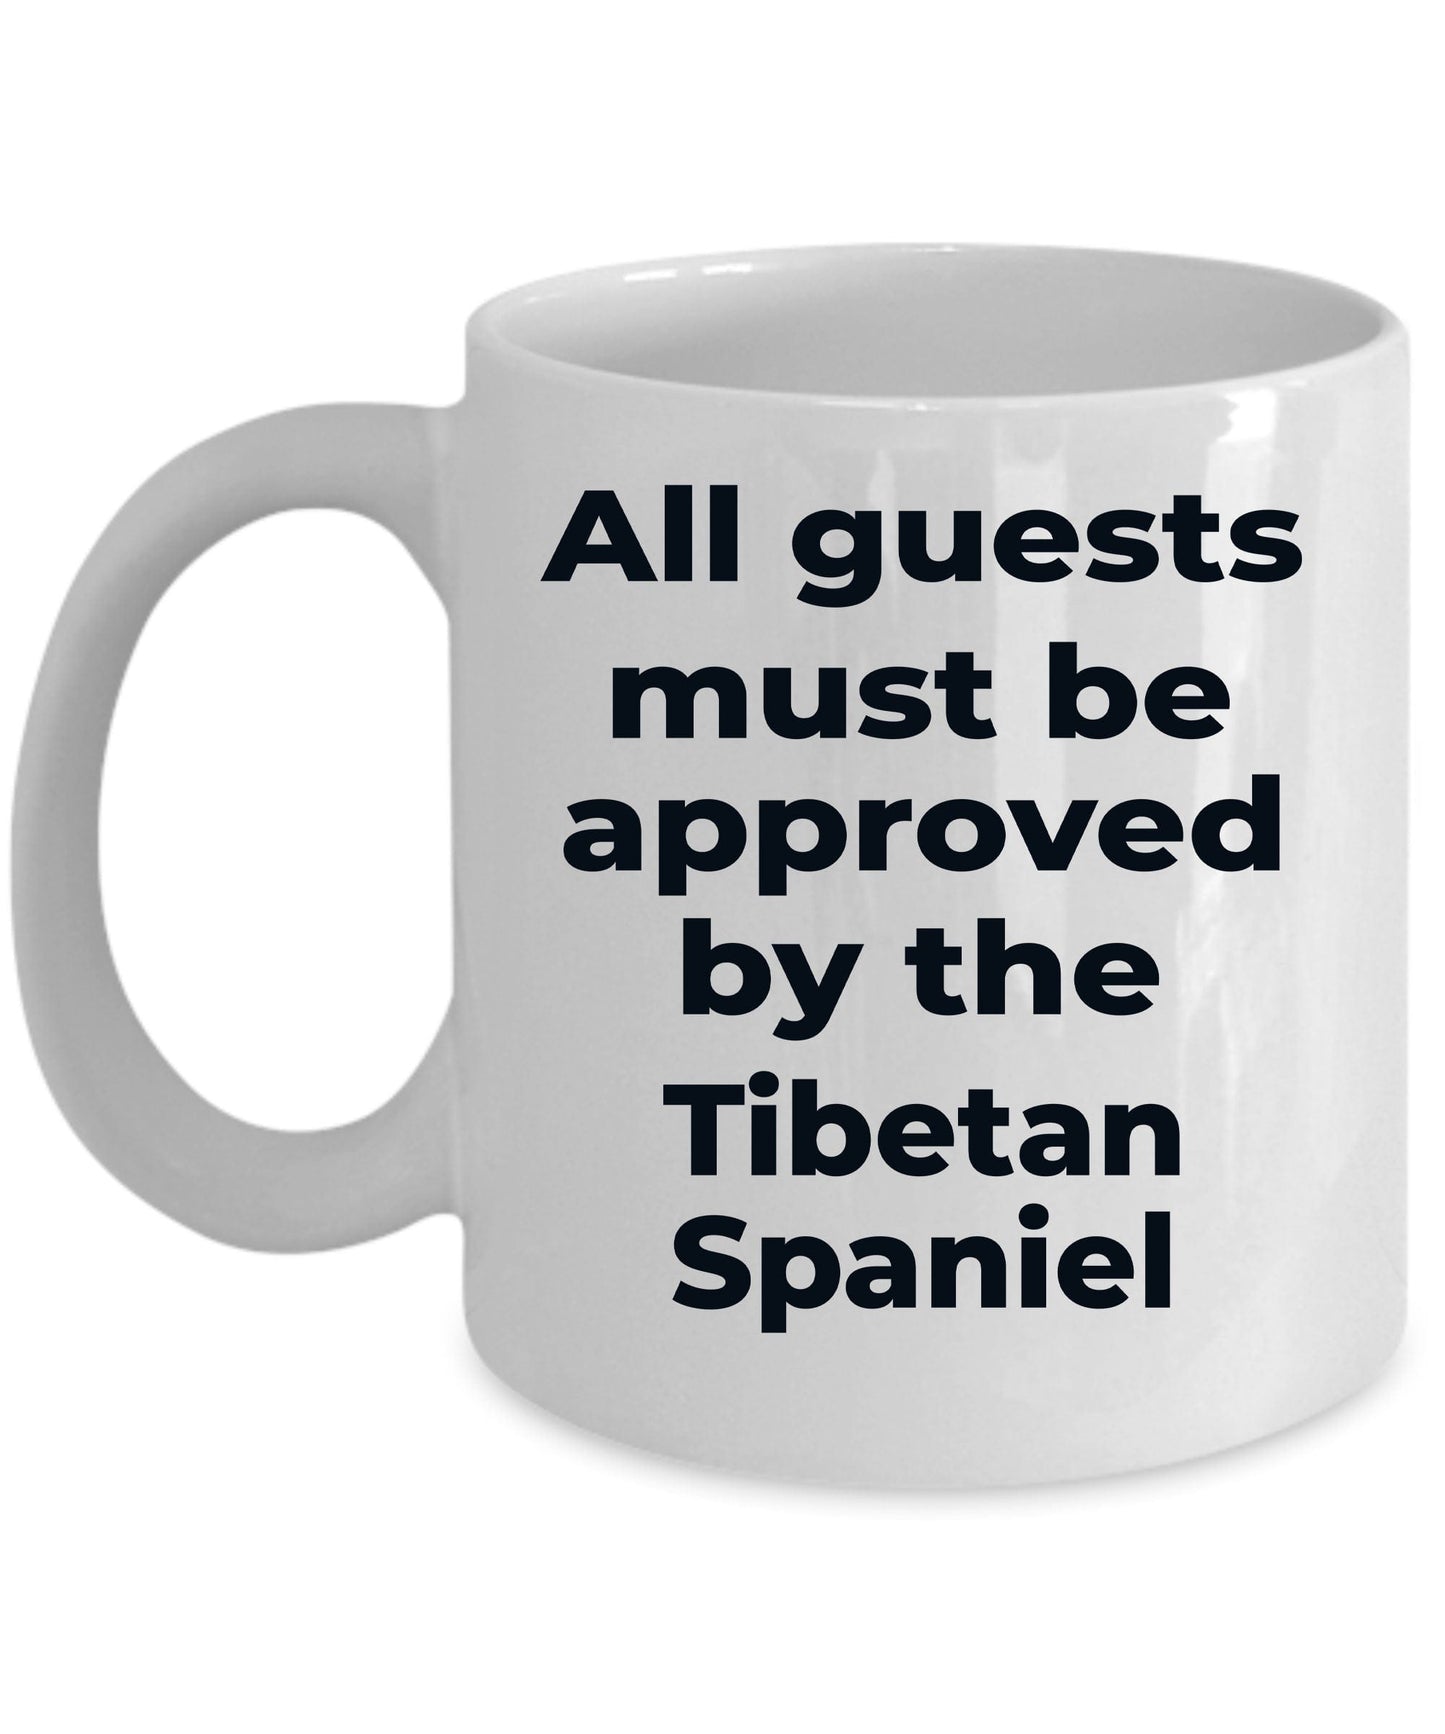 Tibetan Spaniel Funny Dog Coffee Mug - All guests must be appoved by the Tibetan Spaniel